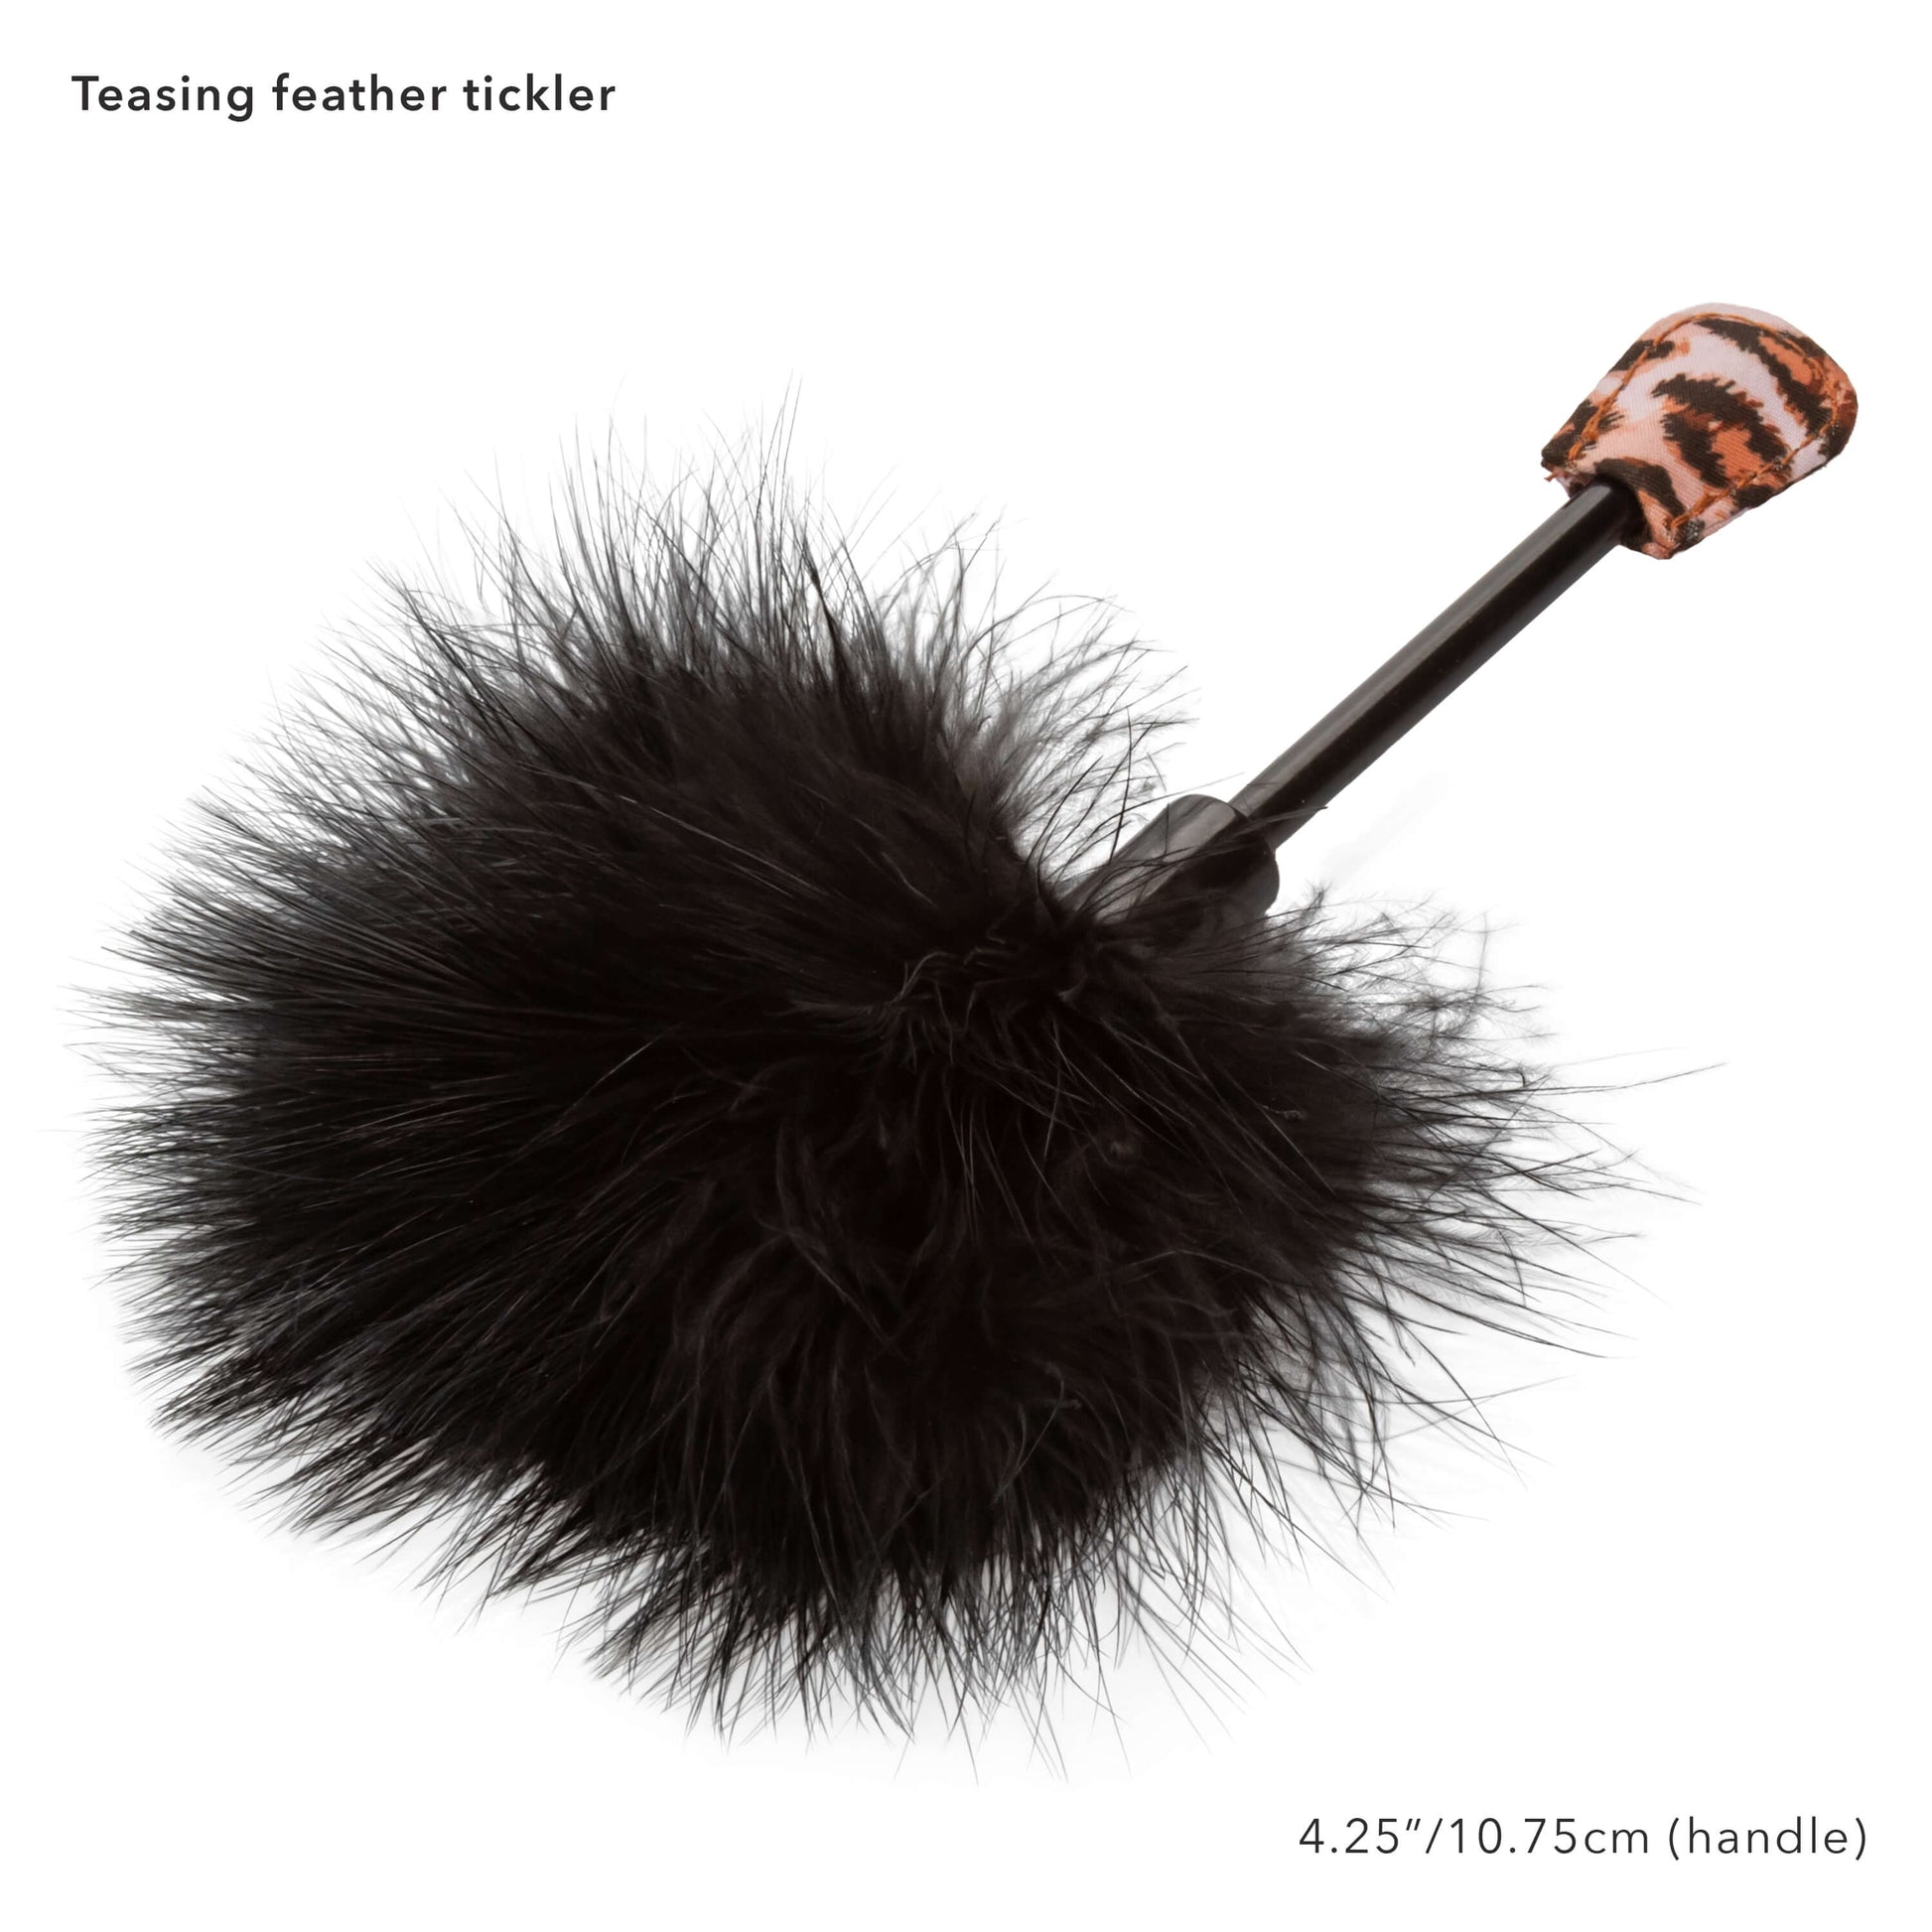 Teasing Feather Tickler -BDSM Unleashed Adventure Set CalExotics - The Bigger O - online sex toy shop USA, Canada & UK shipping available